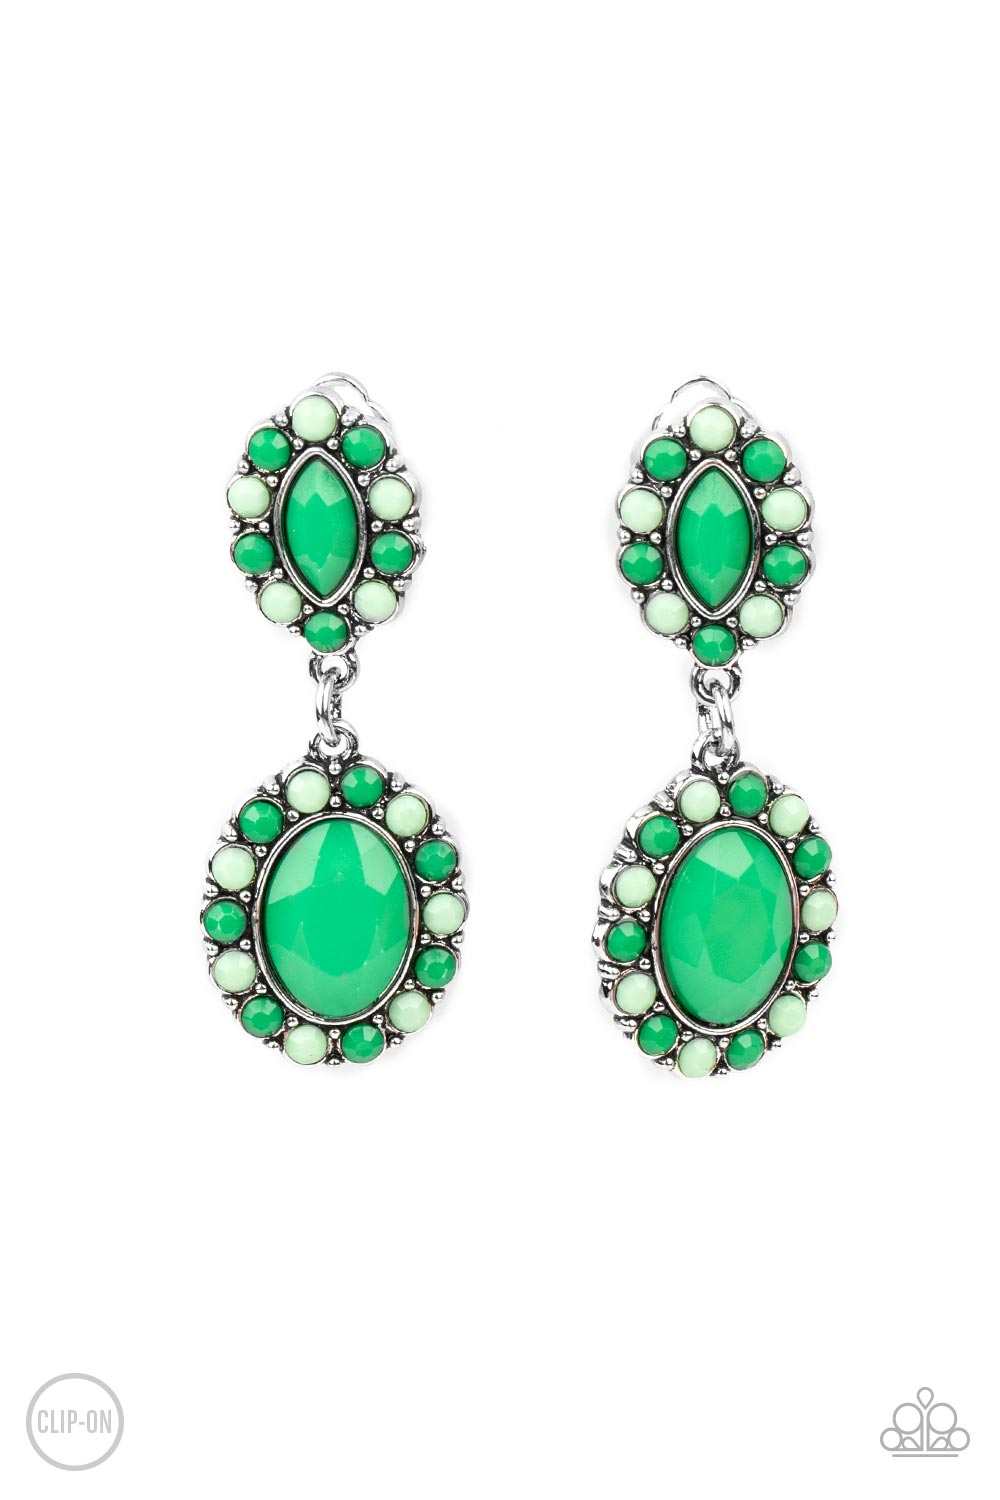 Positively Pampered - Green Clip-On Earrings - Princess Glam Shop